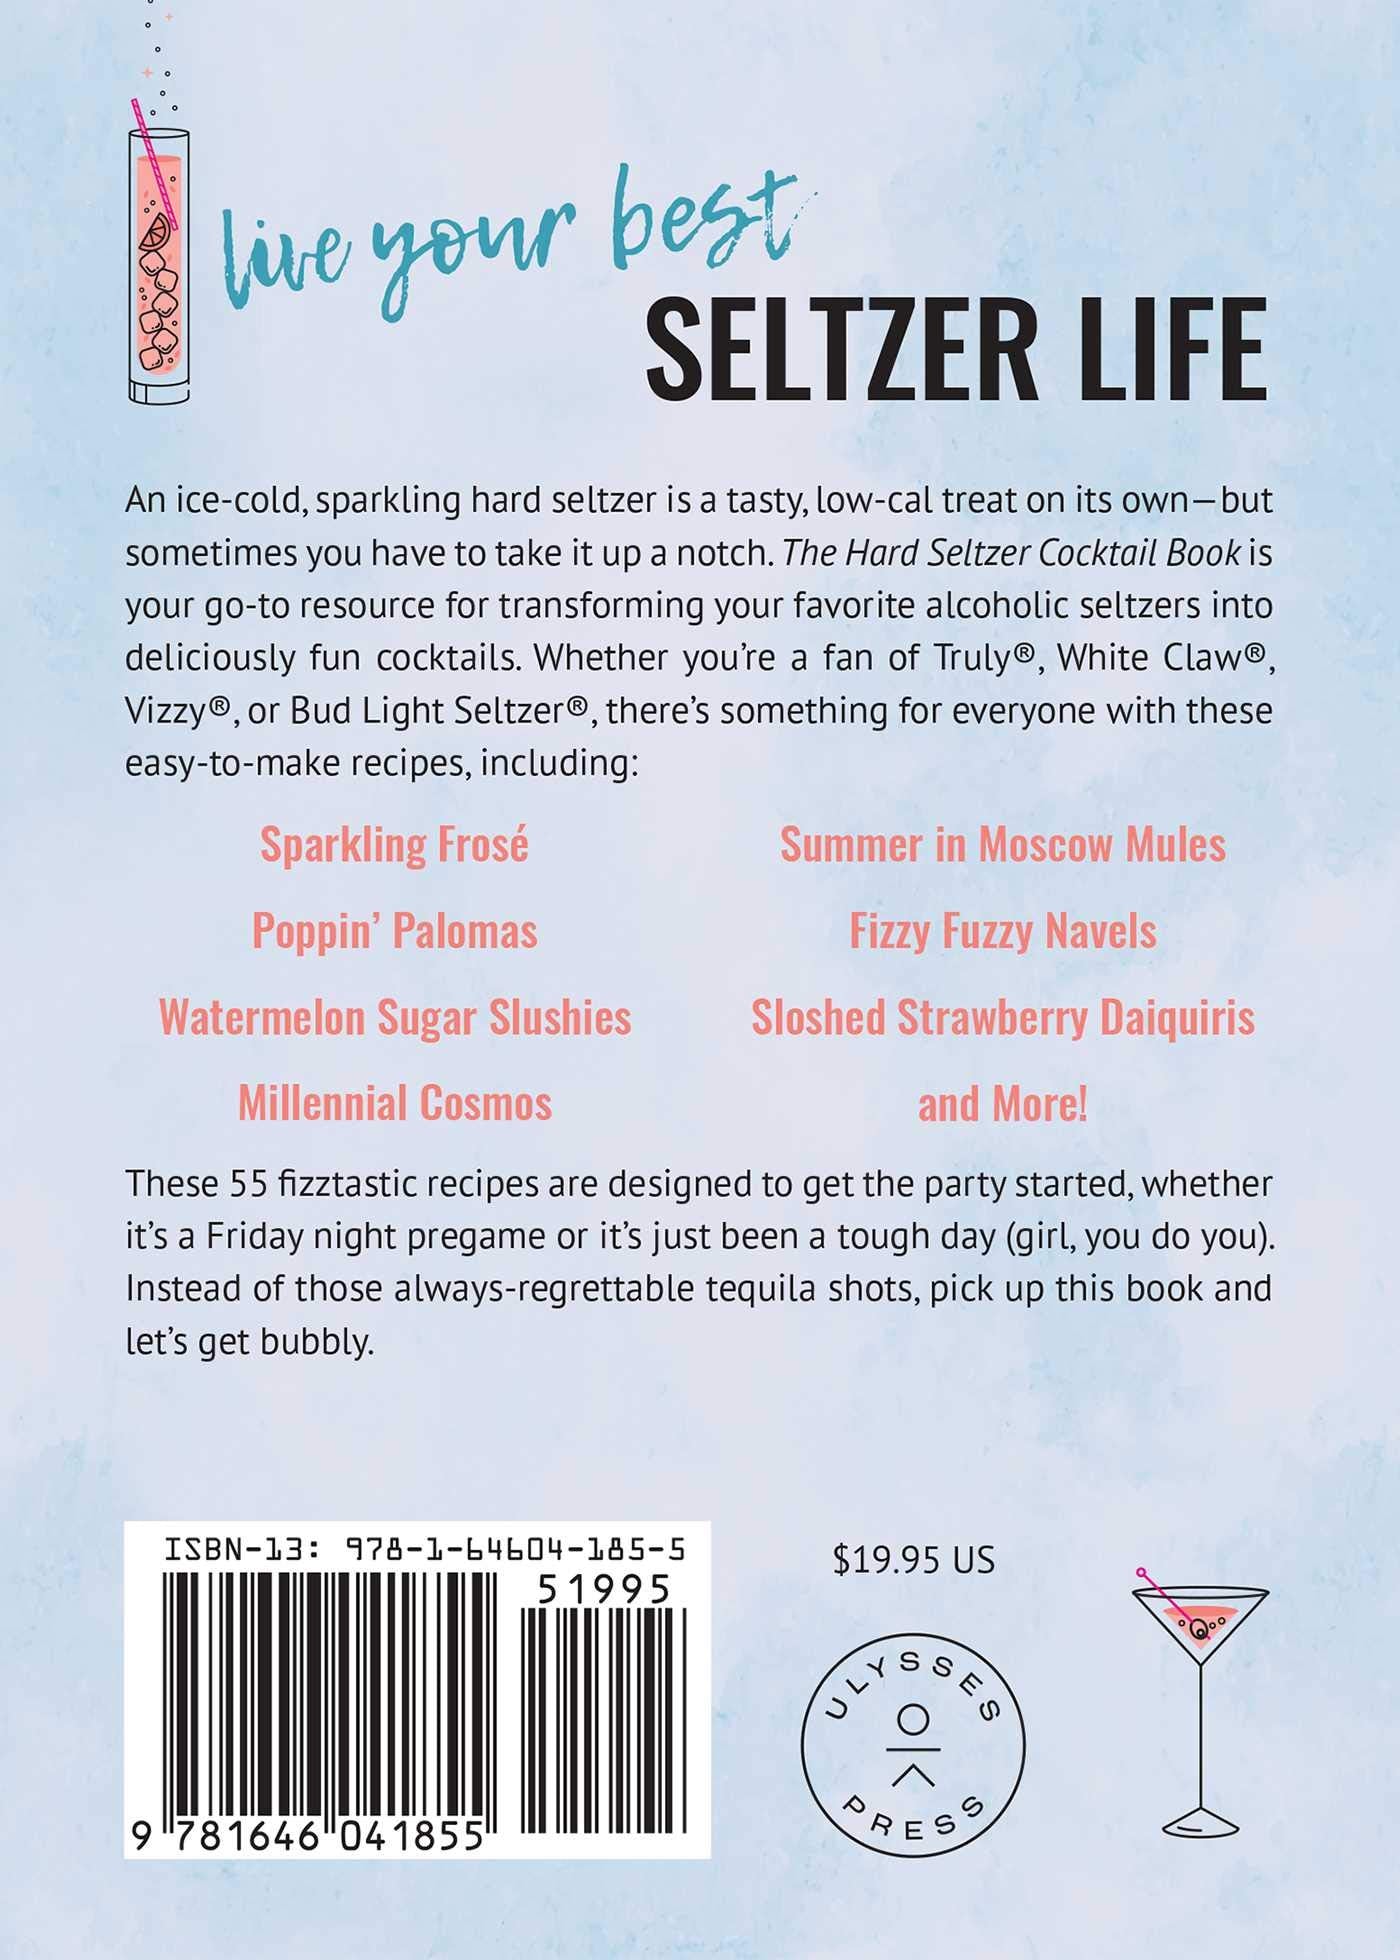 The Hard Seltzer Cocktail book